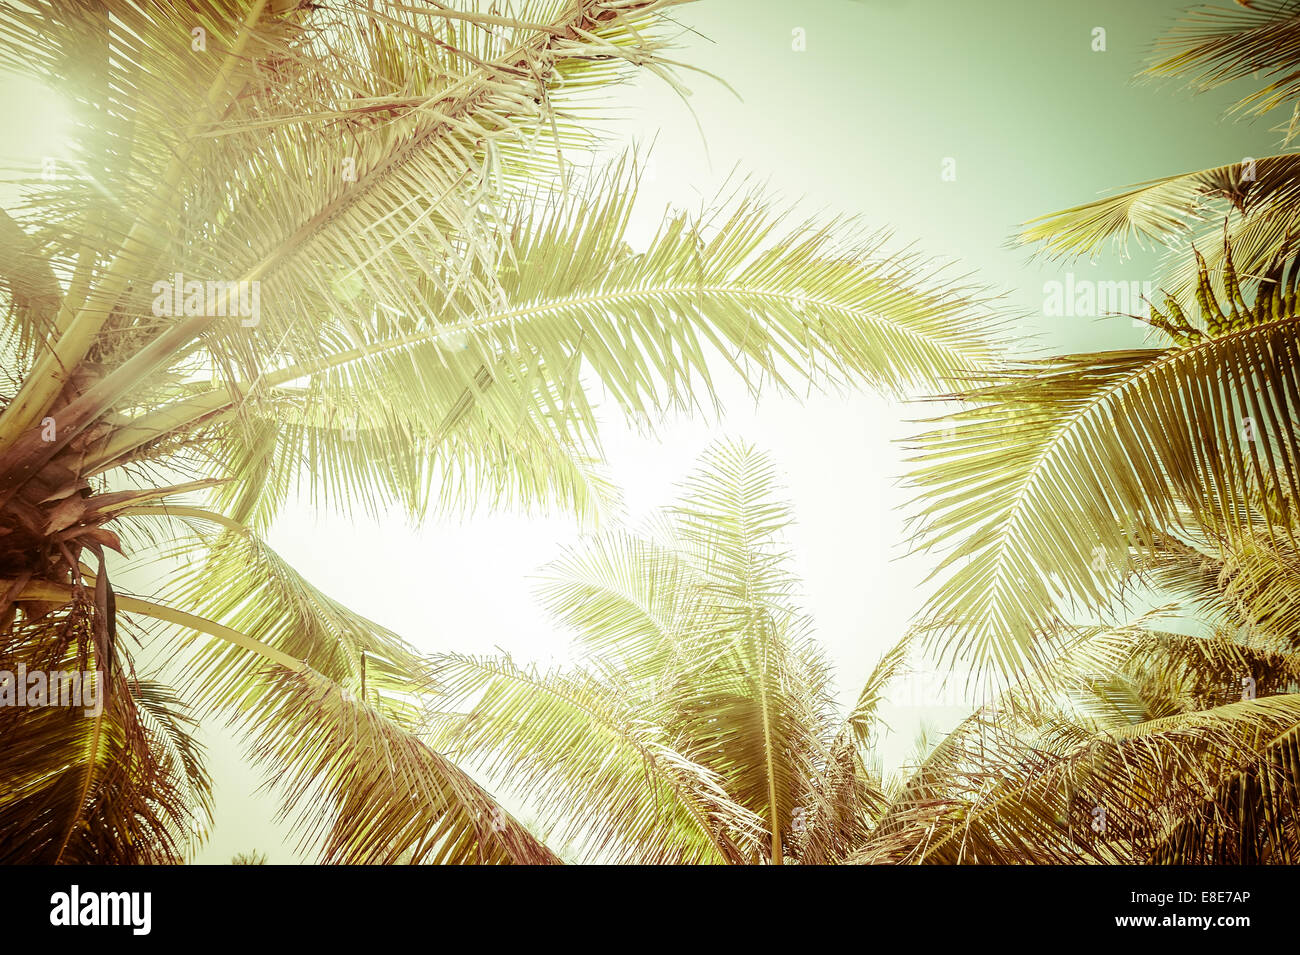 Abstract summer background in vintage style with tropical palm tree leaves at sunny day Stock Photo